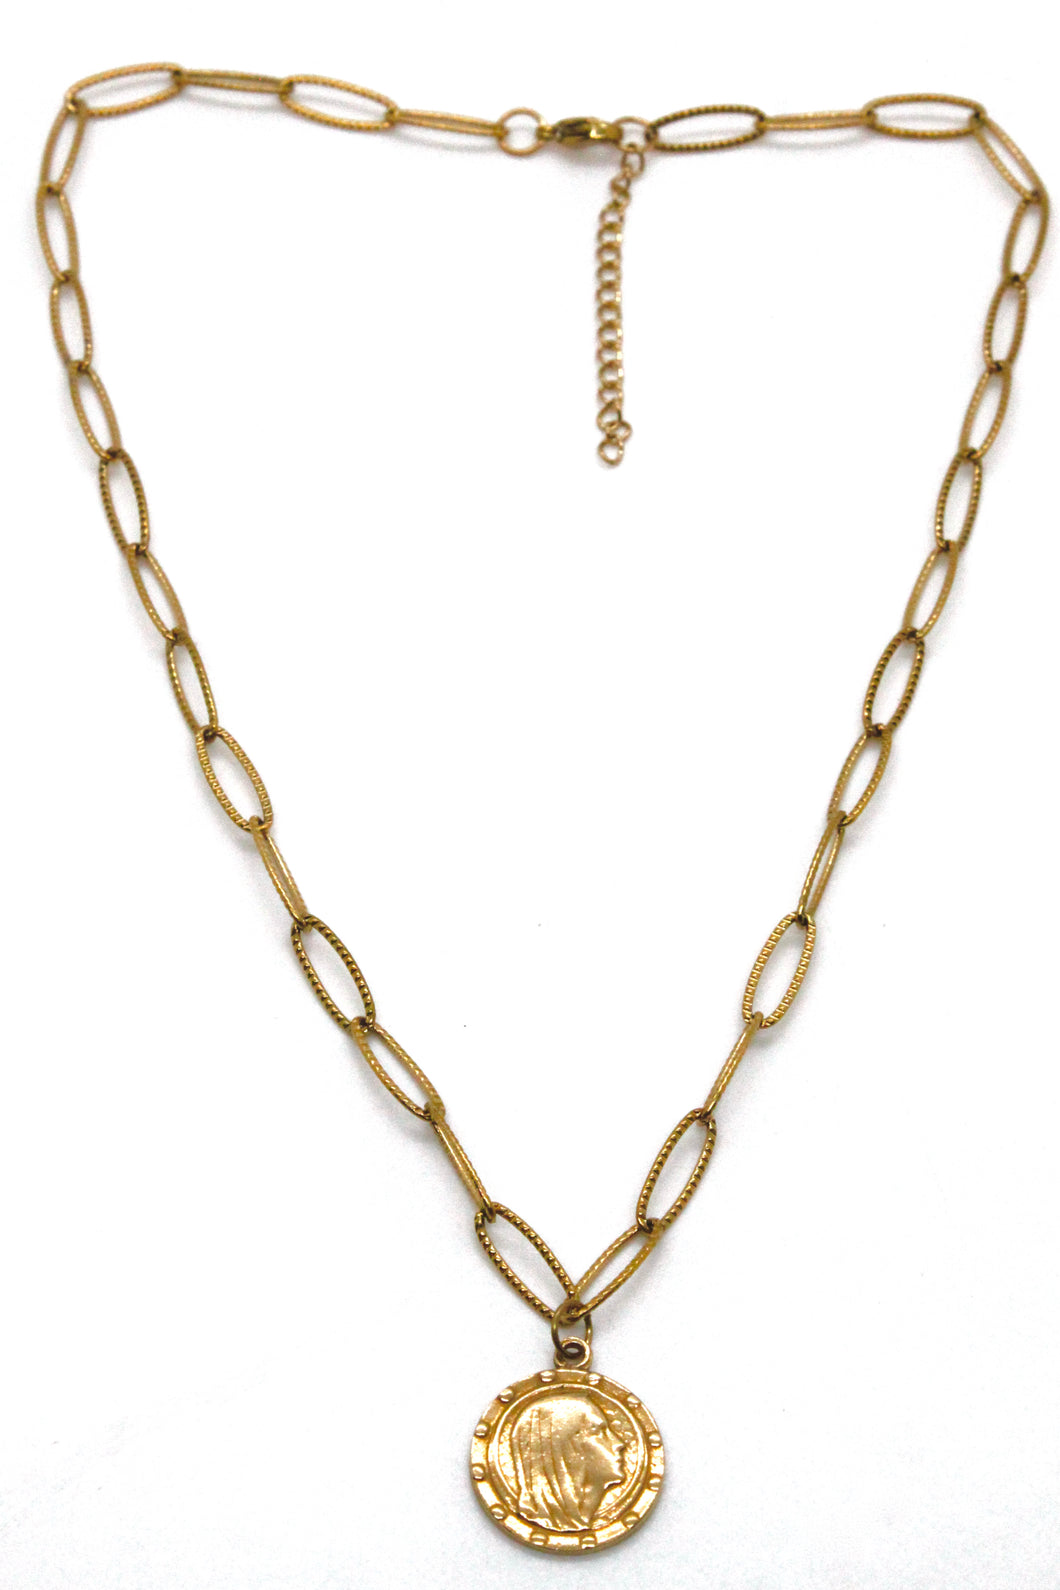 Short Gold Antique Style Chain Necklace with Gold French Religious Charm -French Medals Collection- N6-013